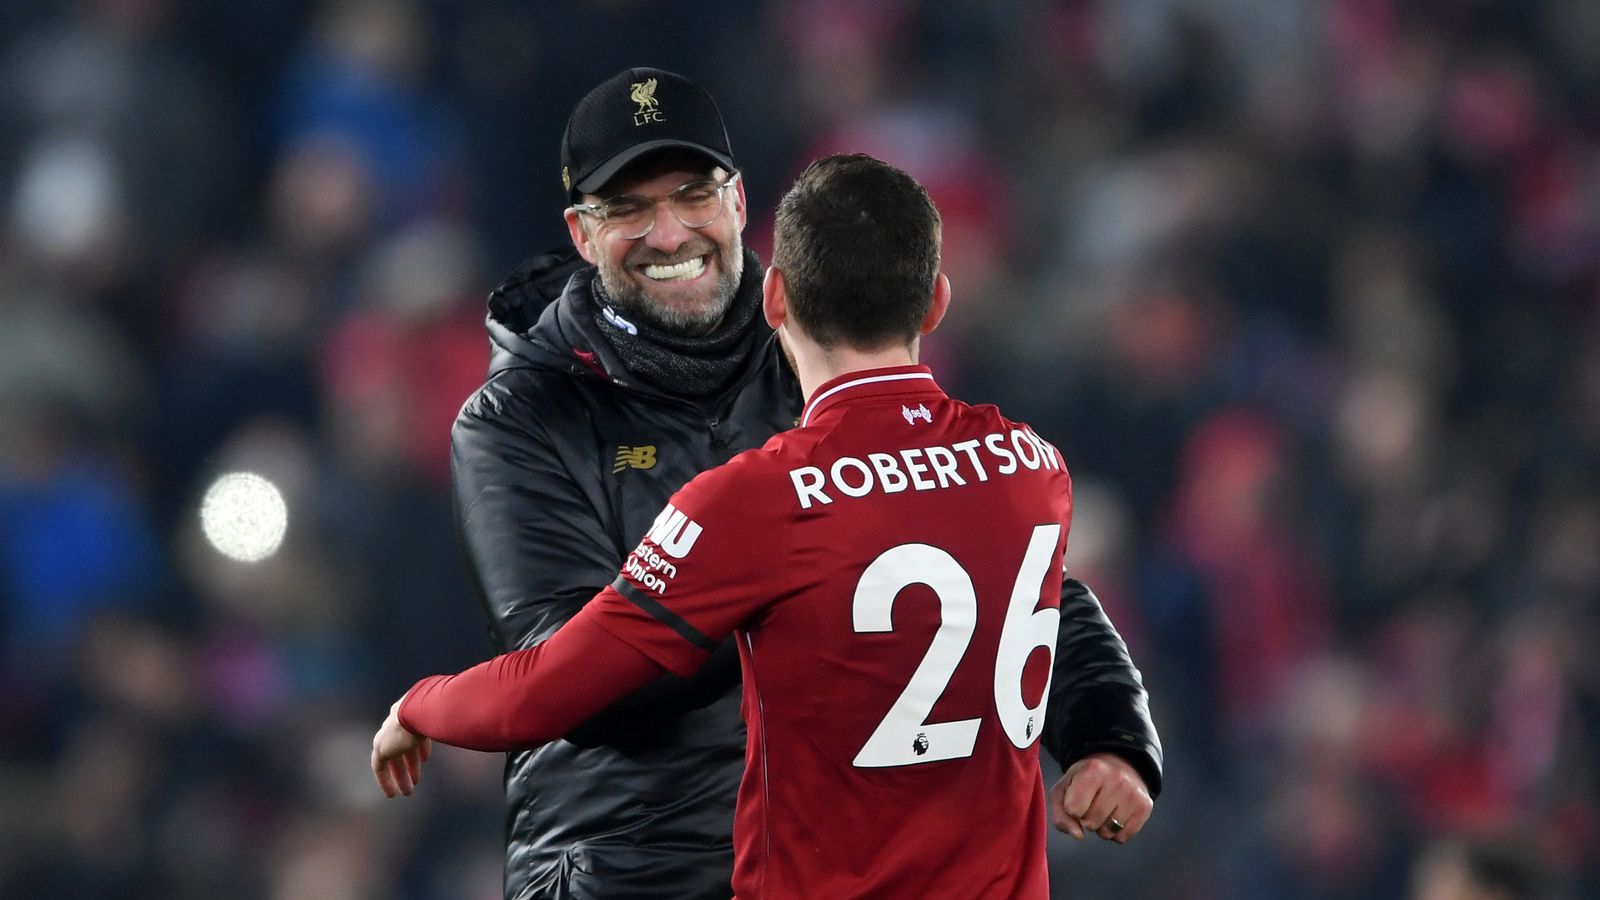 Sky Sports reporter notices Robertson hugging Klopp before coming on